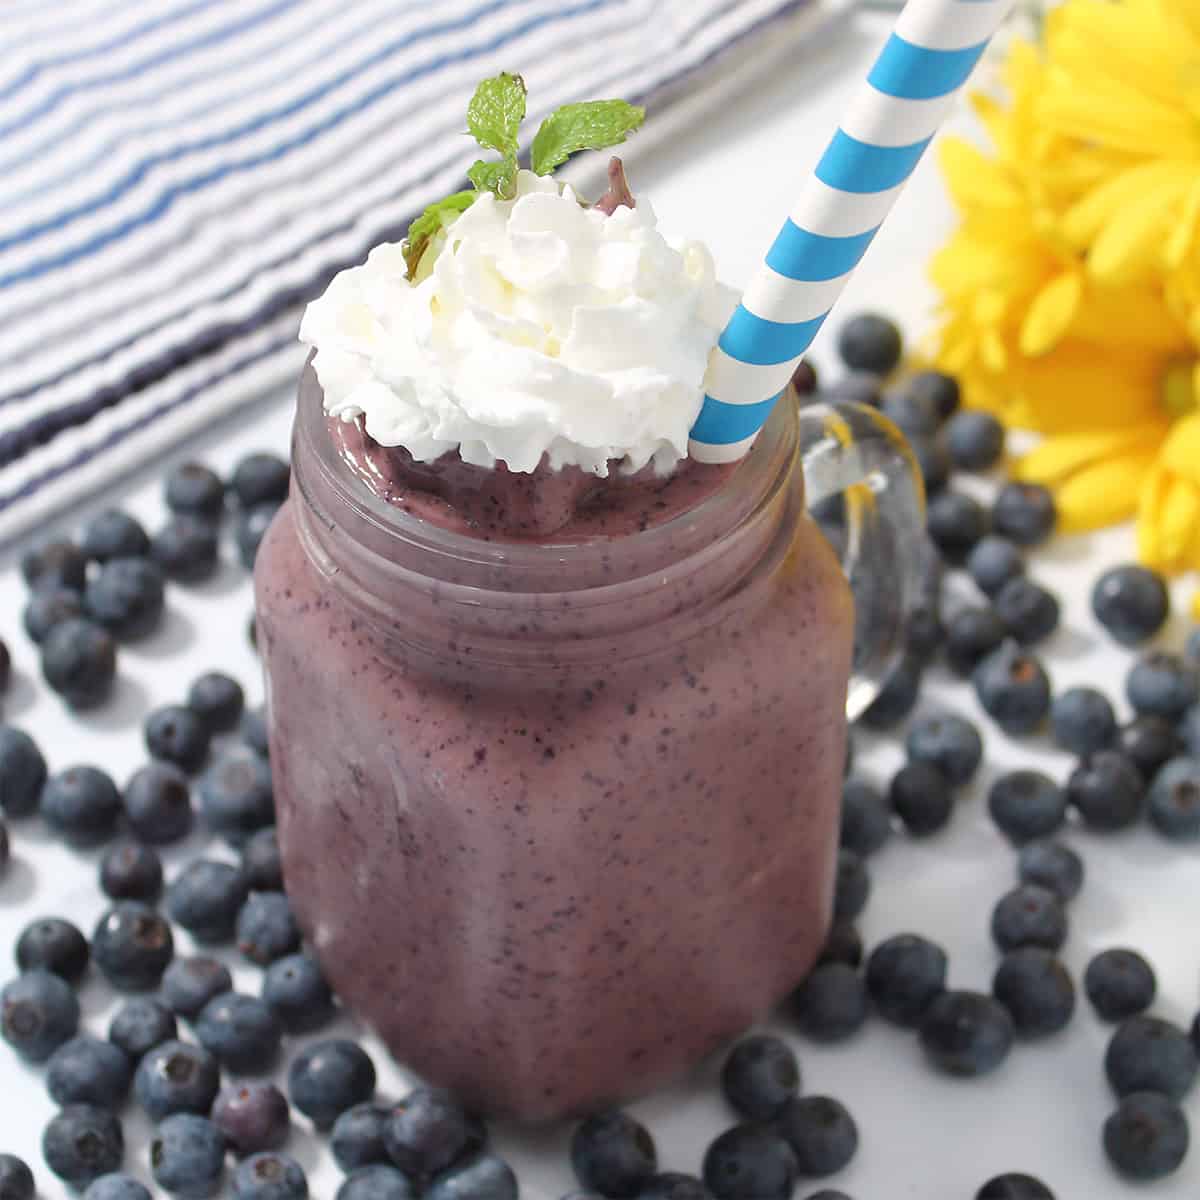 Blueberry Coffee Smoothie garnished with whipped cream amid blueberries with yellow flowers in background.